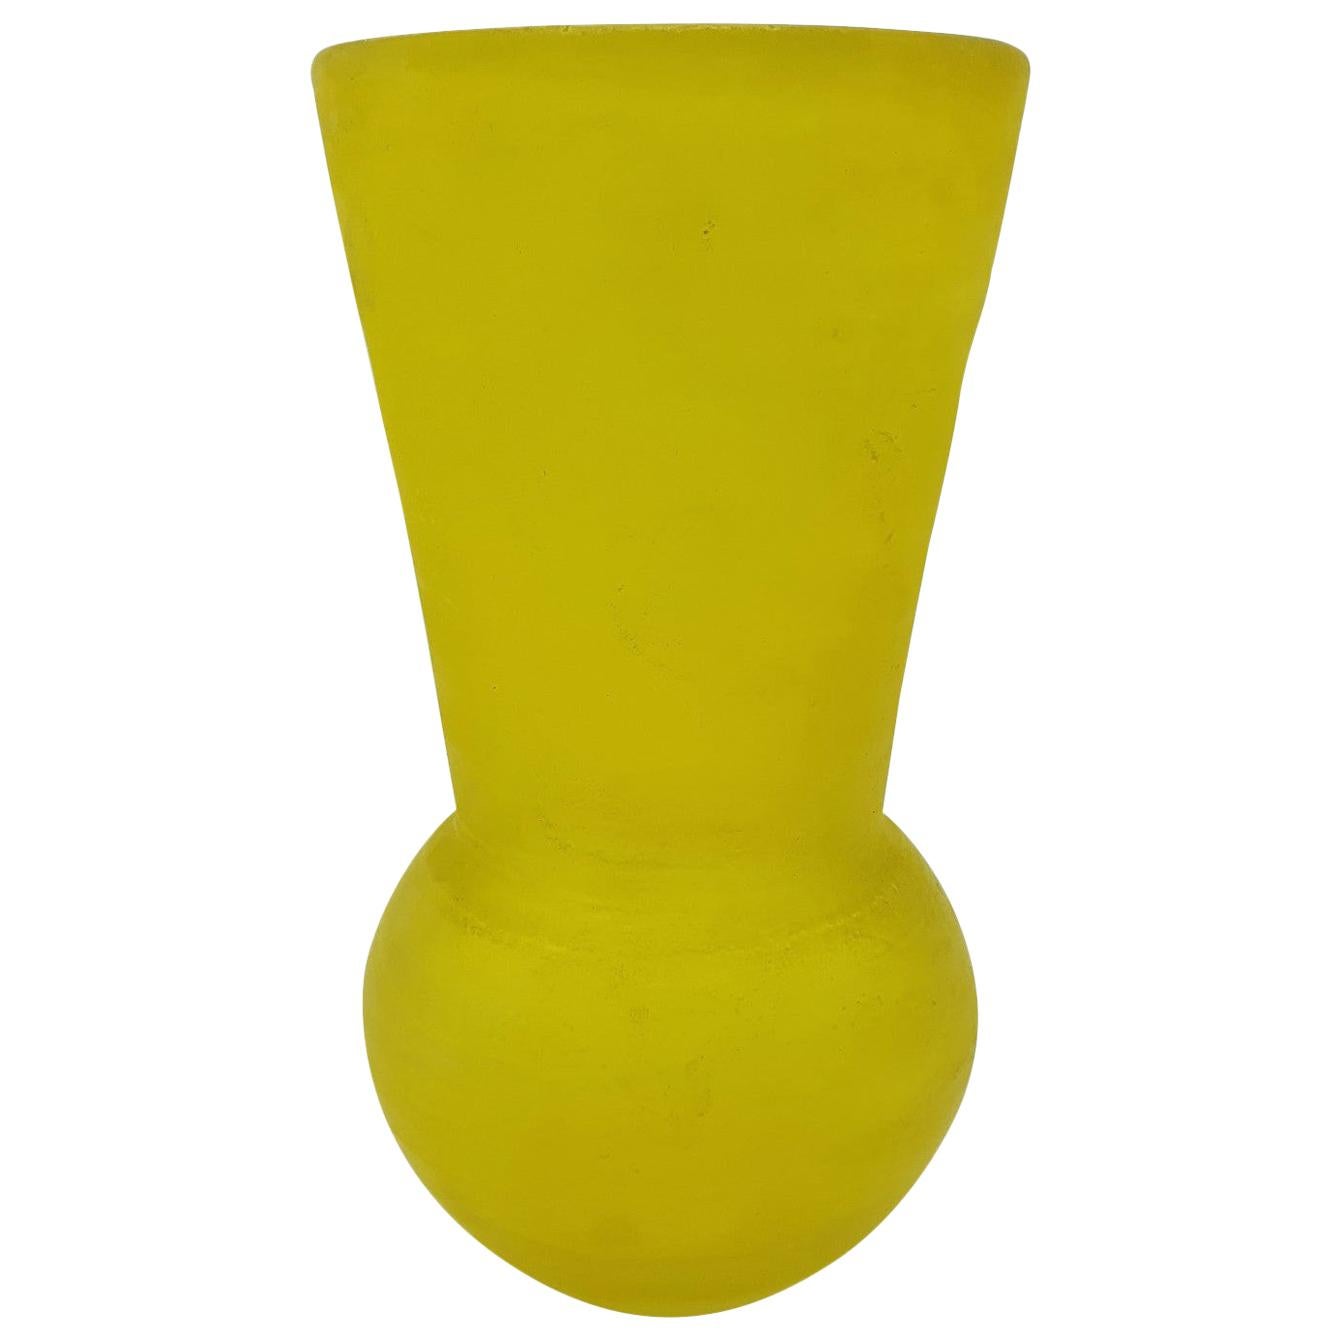 Modern Murano Yellow Glass Vase, "Scavo" Finish by Cenedese, Mid-1980s For Sale